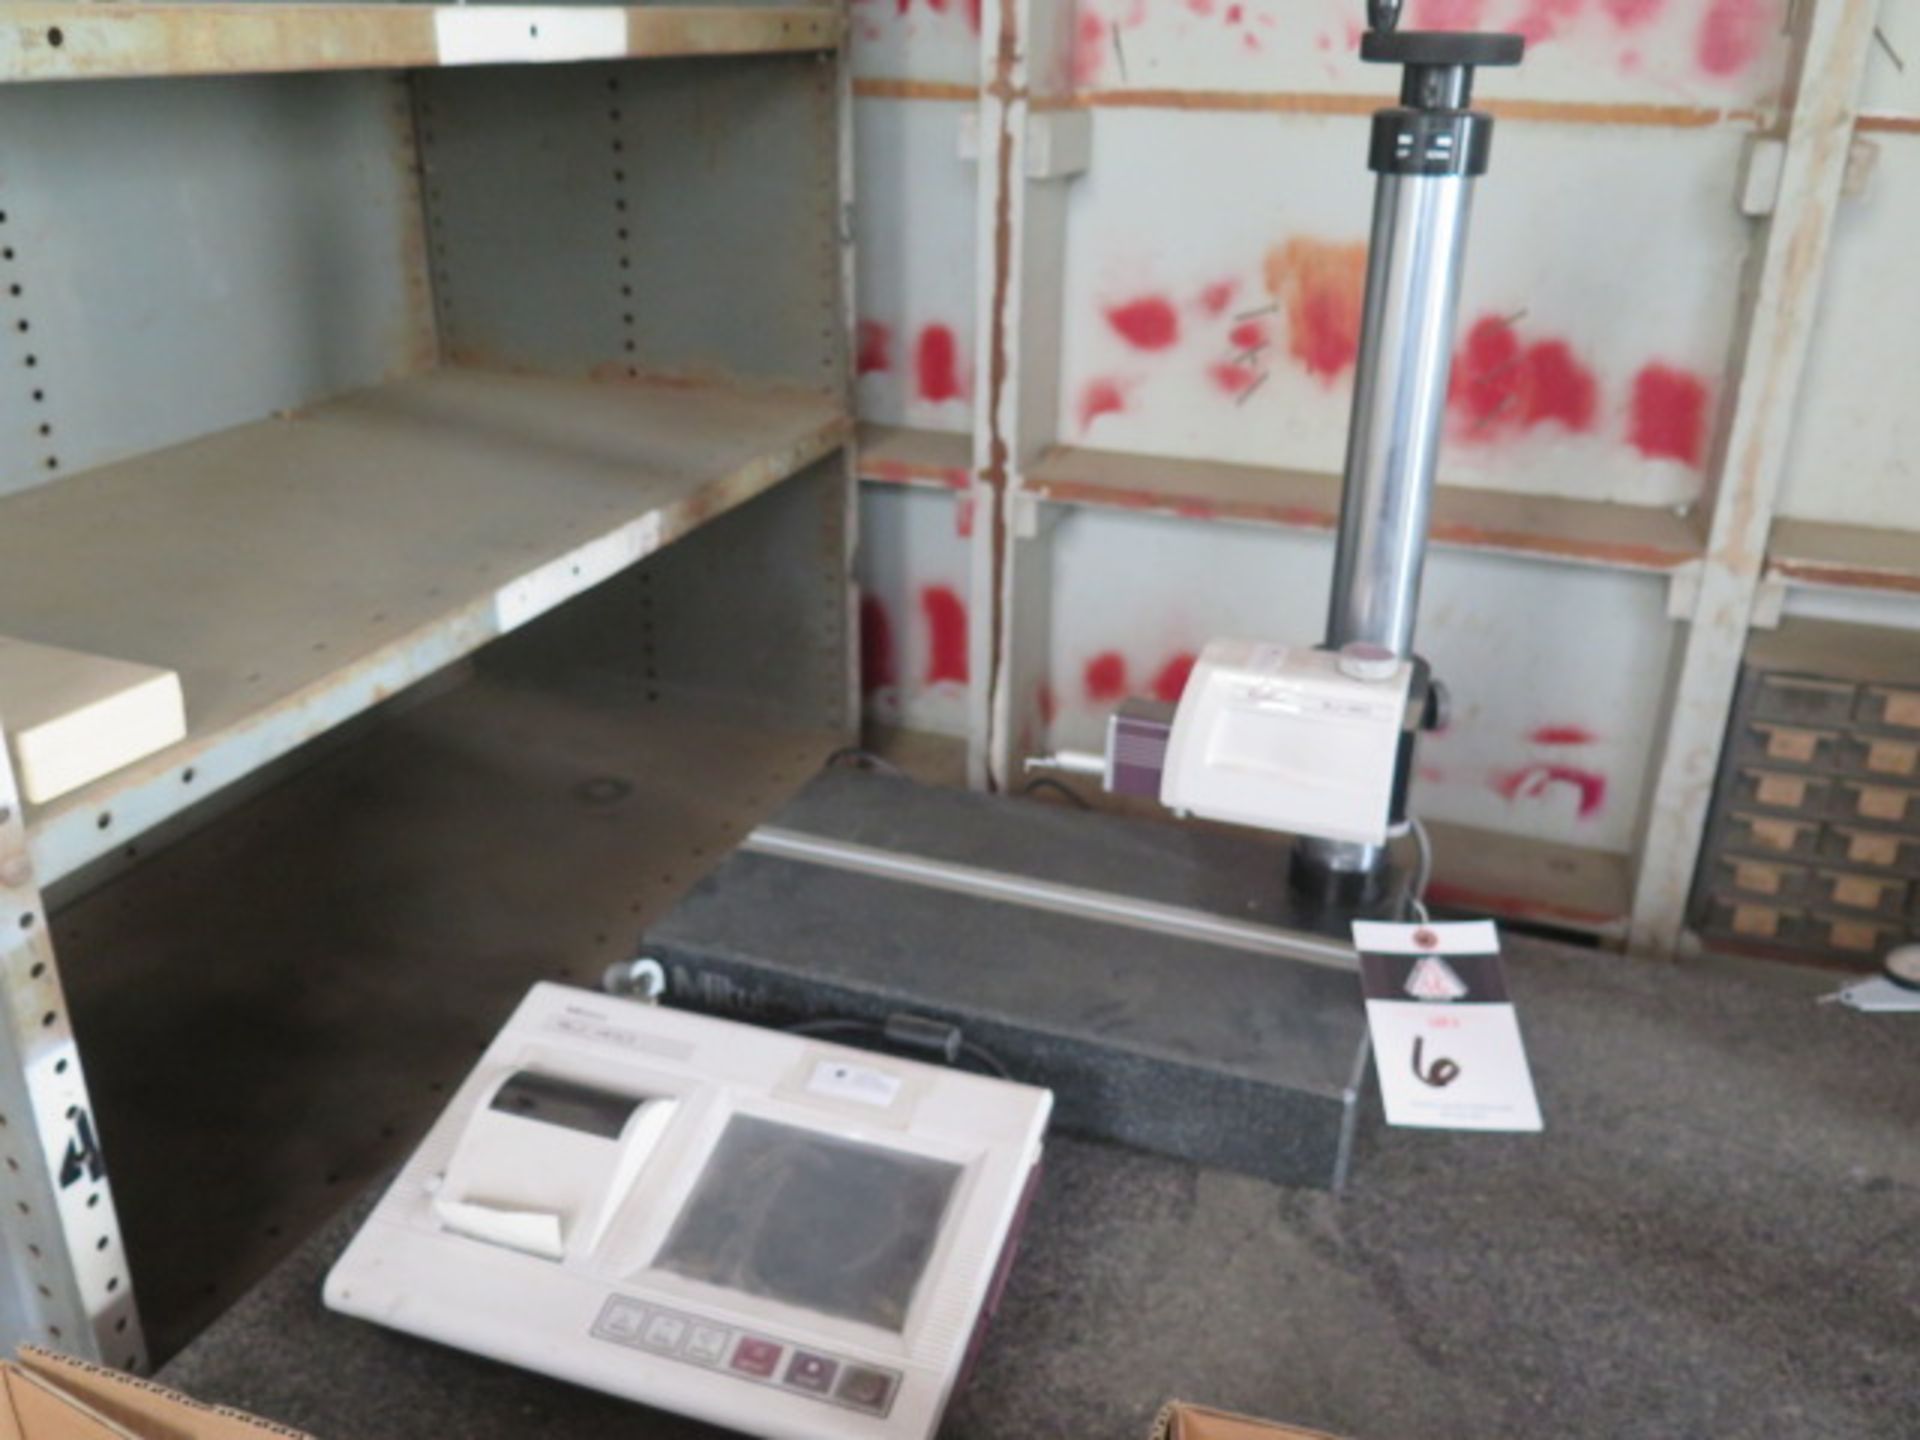 Mitutoyo SJ-410 Surface Roughness Gage w/ Digital Controls, Printer, 10” x 16” Granite SOLD AS IS